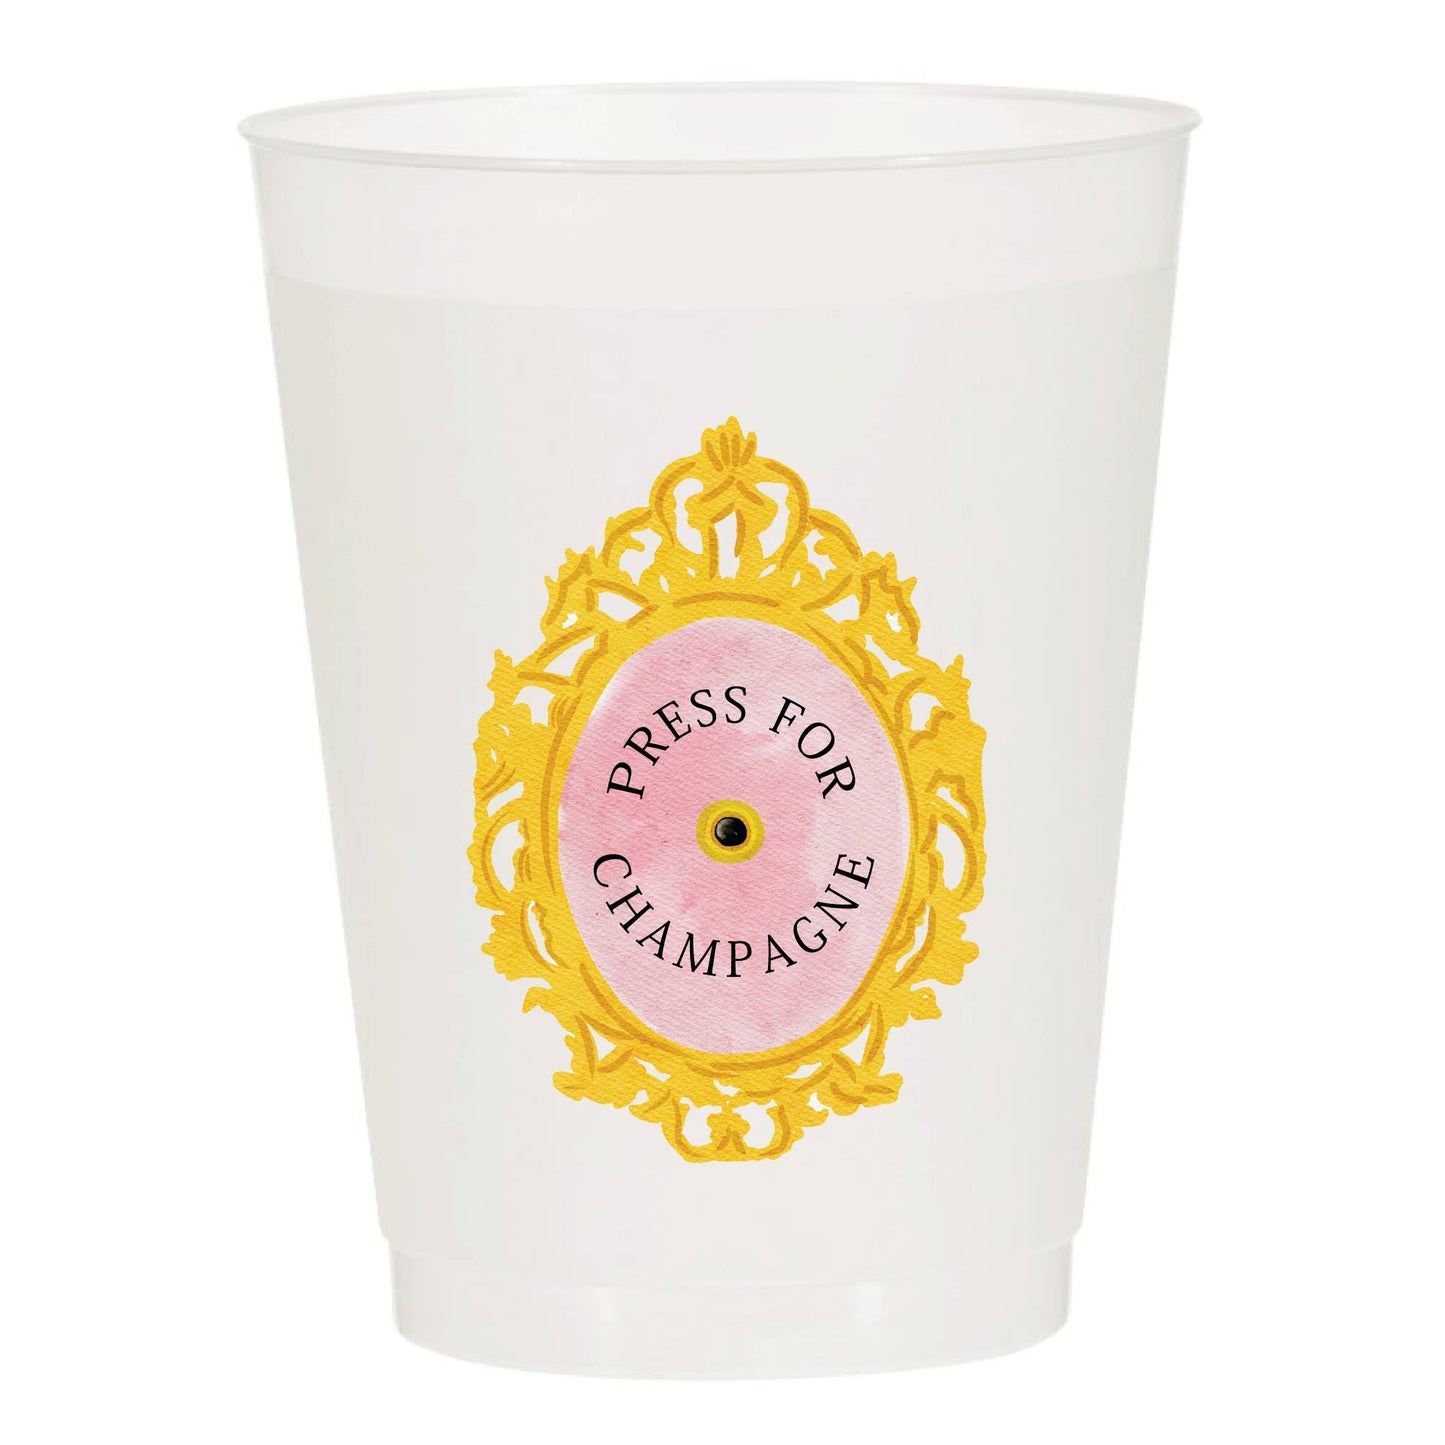 Press for Champagne - Reusable Cups - Set of 10